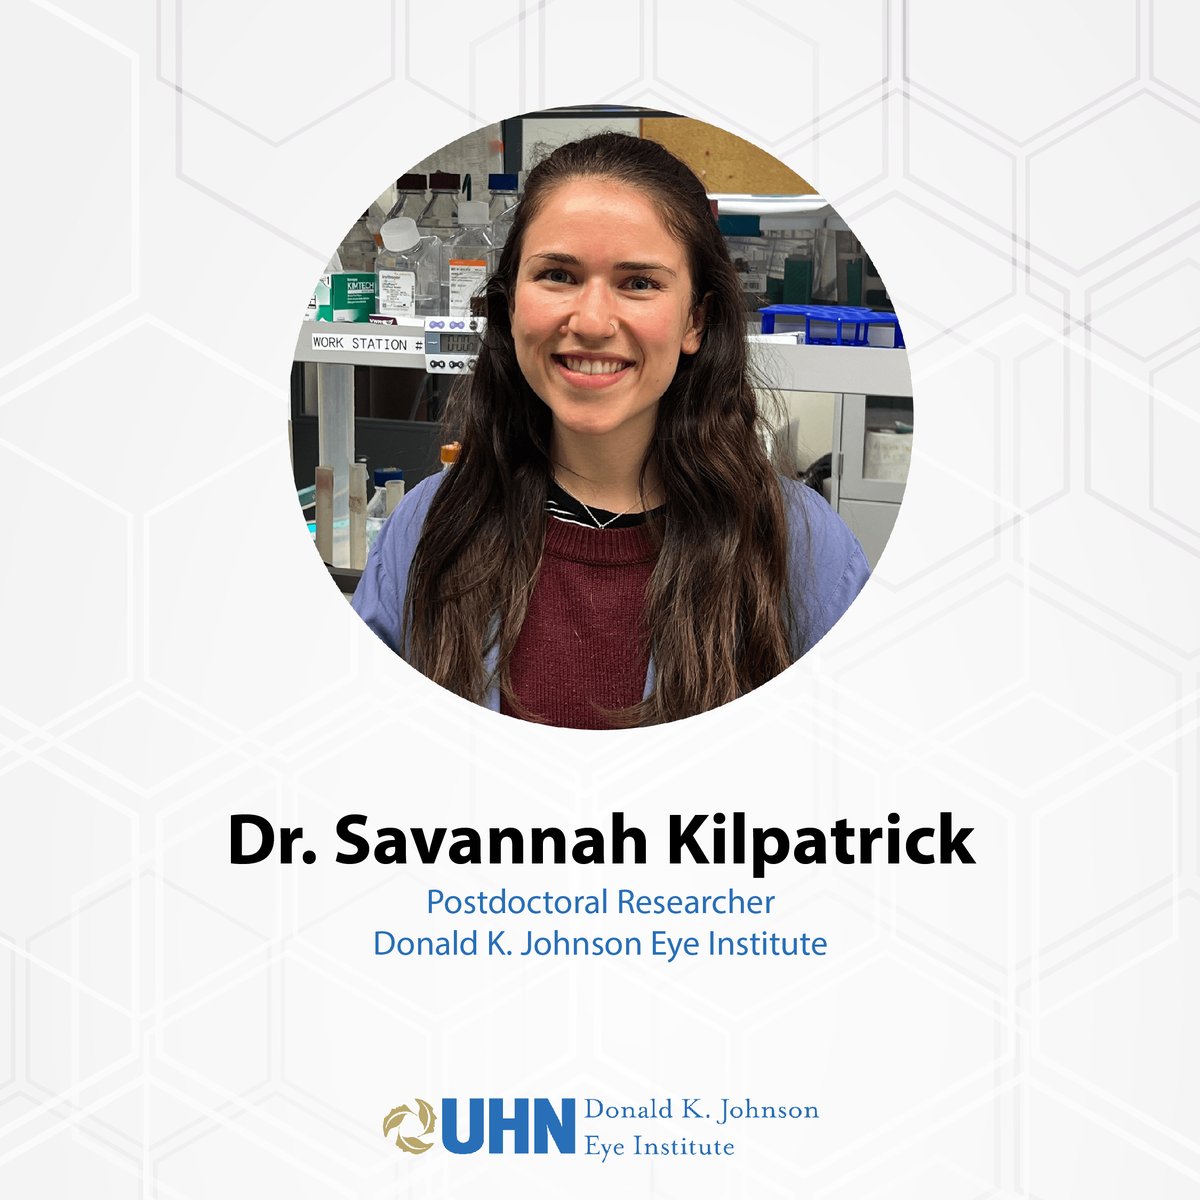 'Research is incredible because you're able to learn something new each day, with the ultimate goal of helping affected patients.' Meet Dr. Savannah Kilpatrick, a Postdoctoral Researcher in Dr. Karun Singh's lab @DKJEI_UHN. Read in our newsletter >> bit.ly/42gvcQh